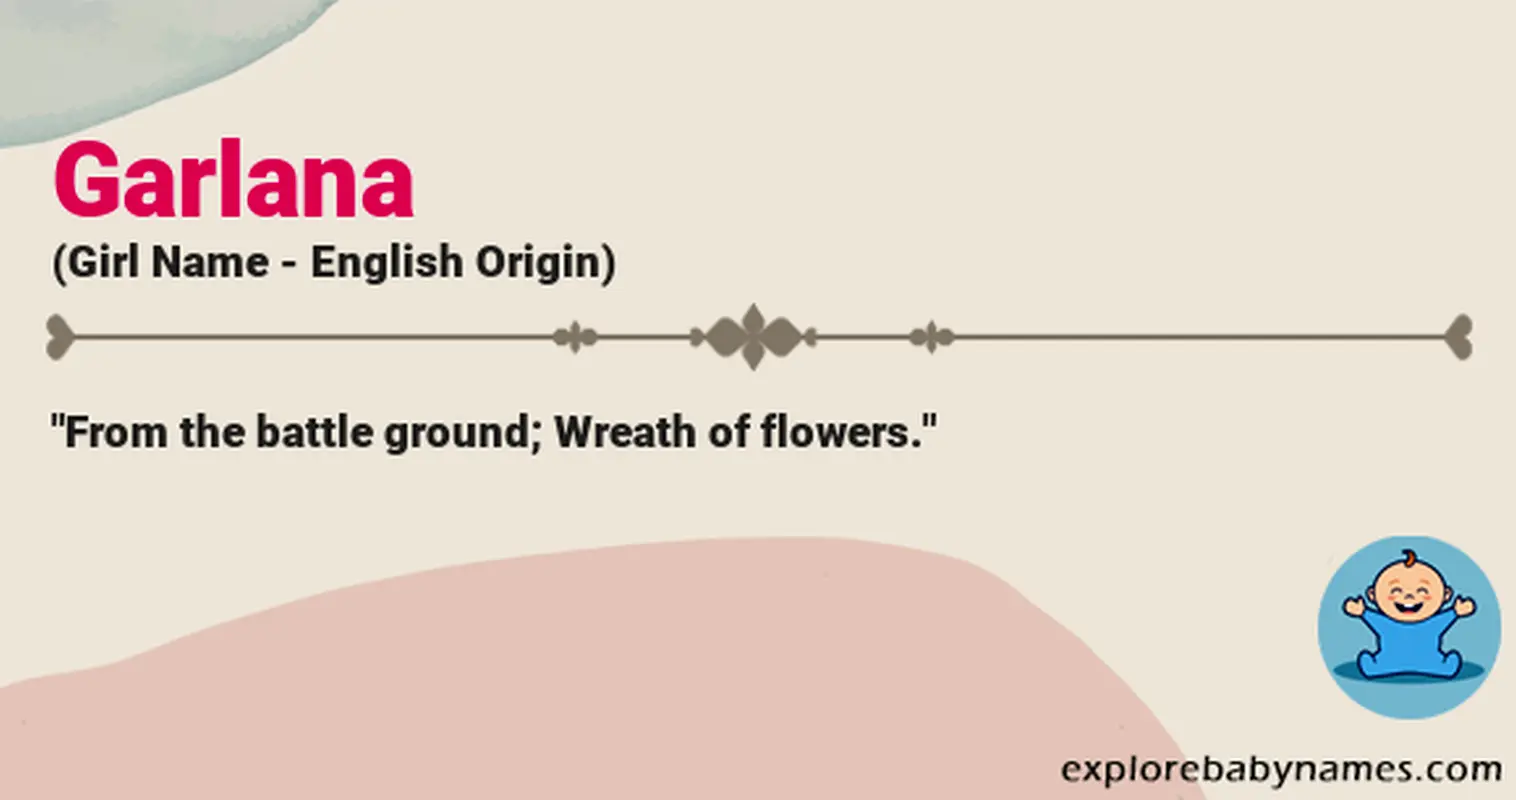 Meaning of Garlana